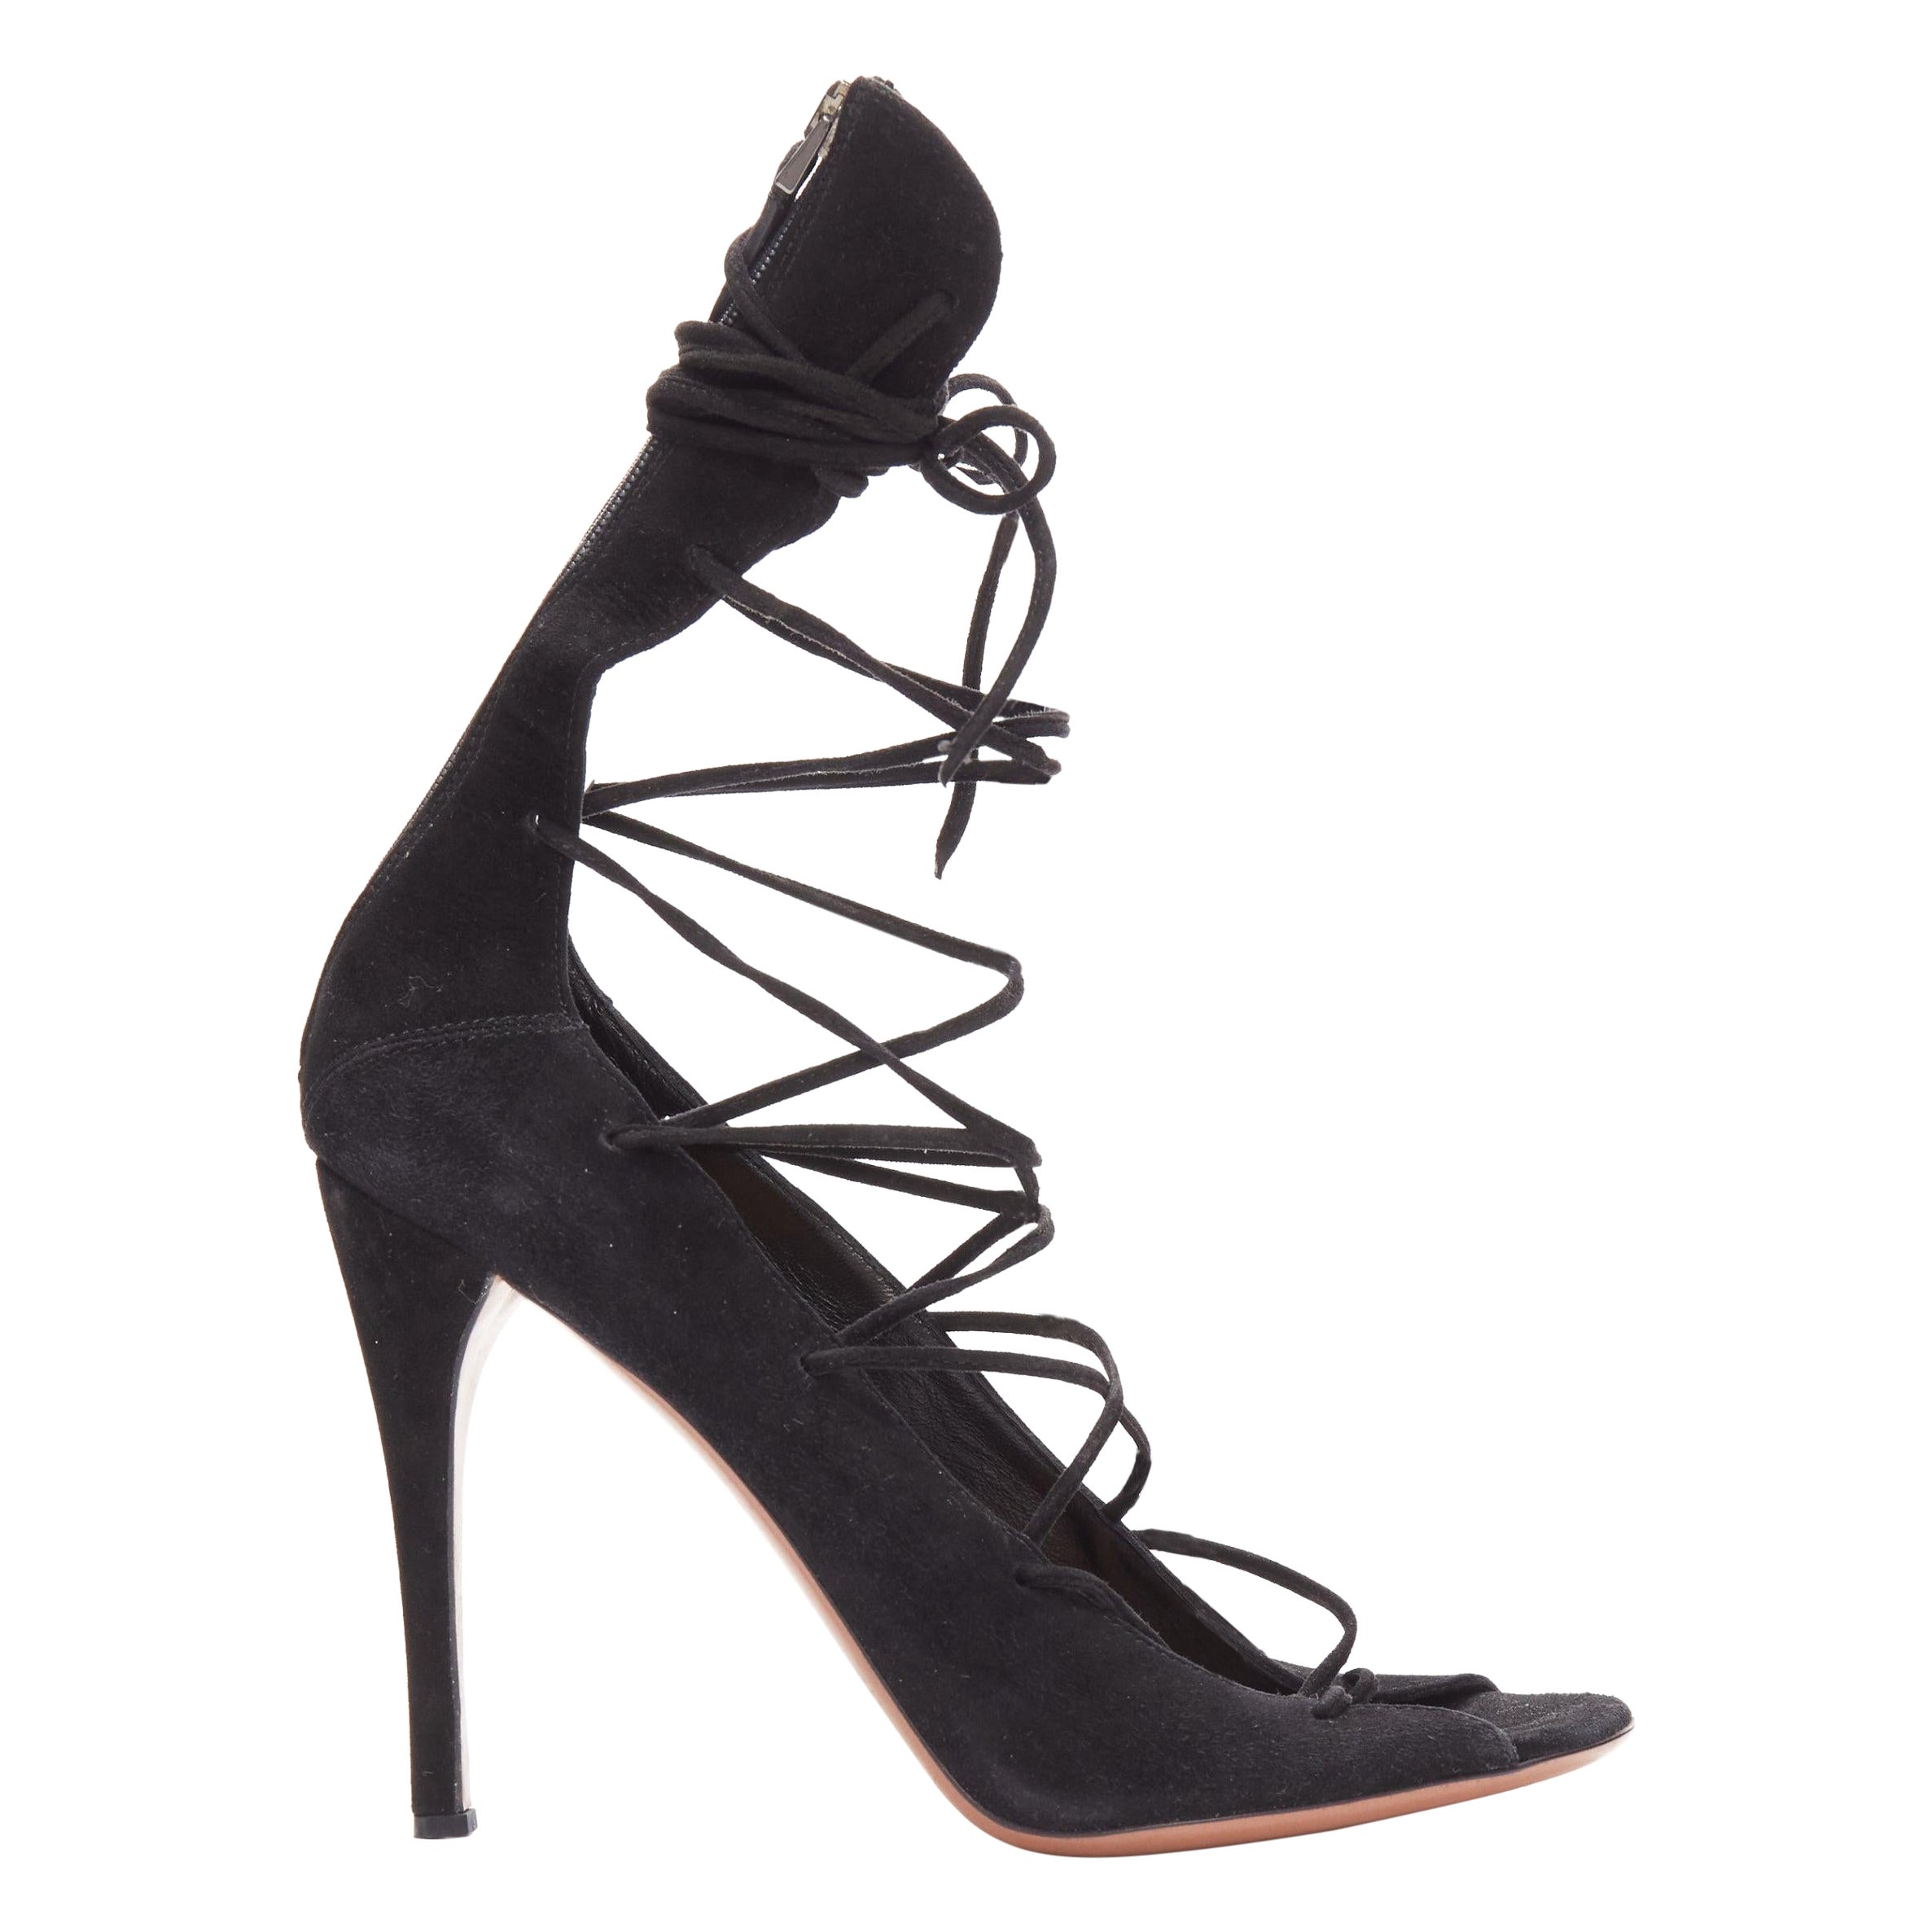 ALAIA black suede leather lace up back zip strappy sandal heels EU38.5 For Sale